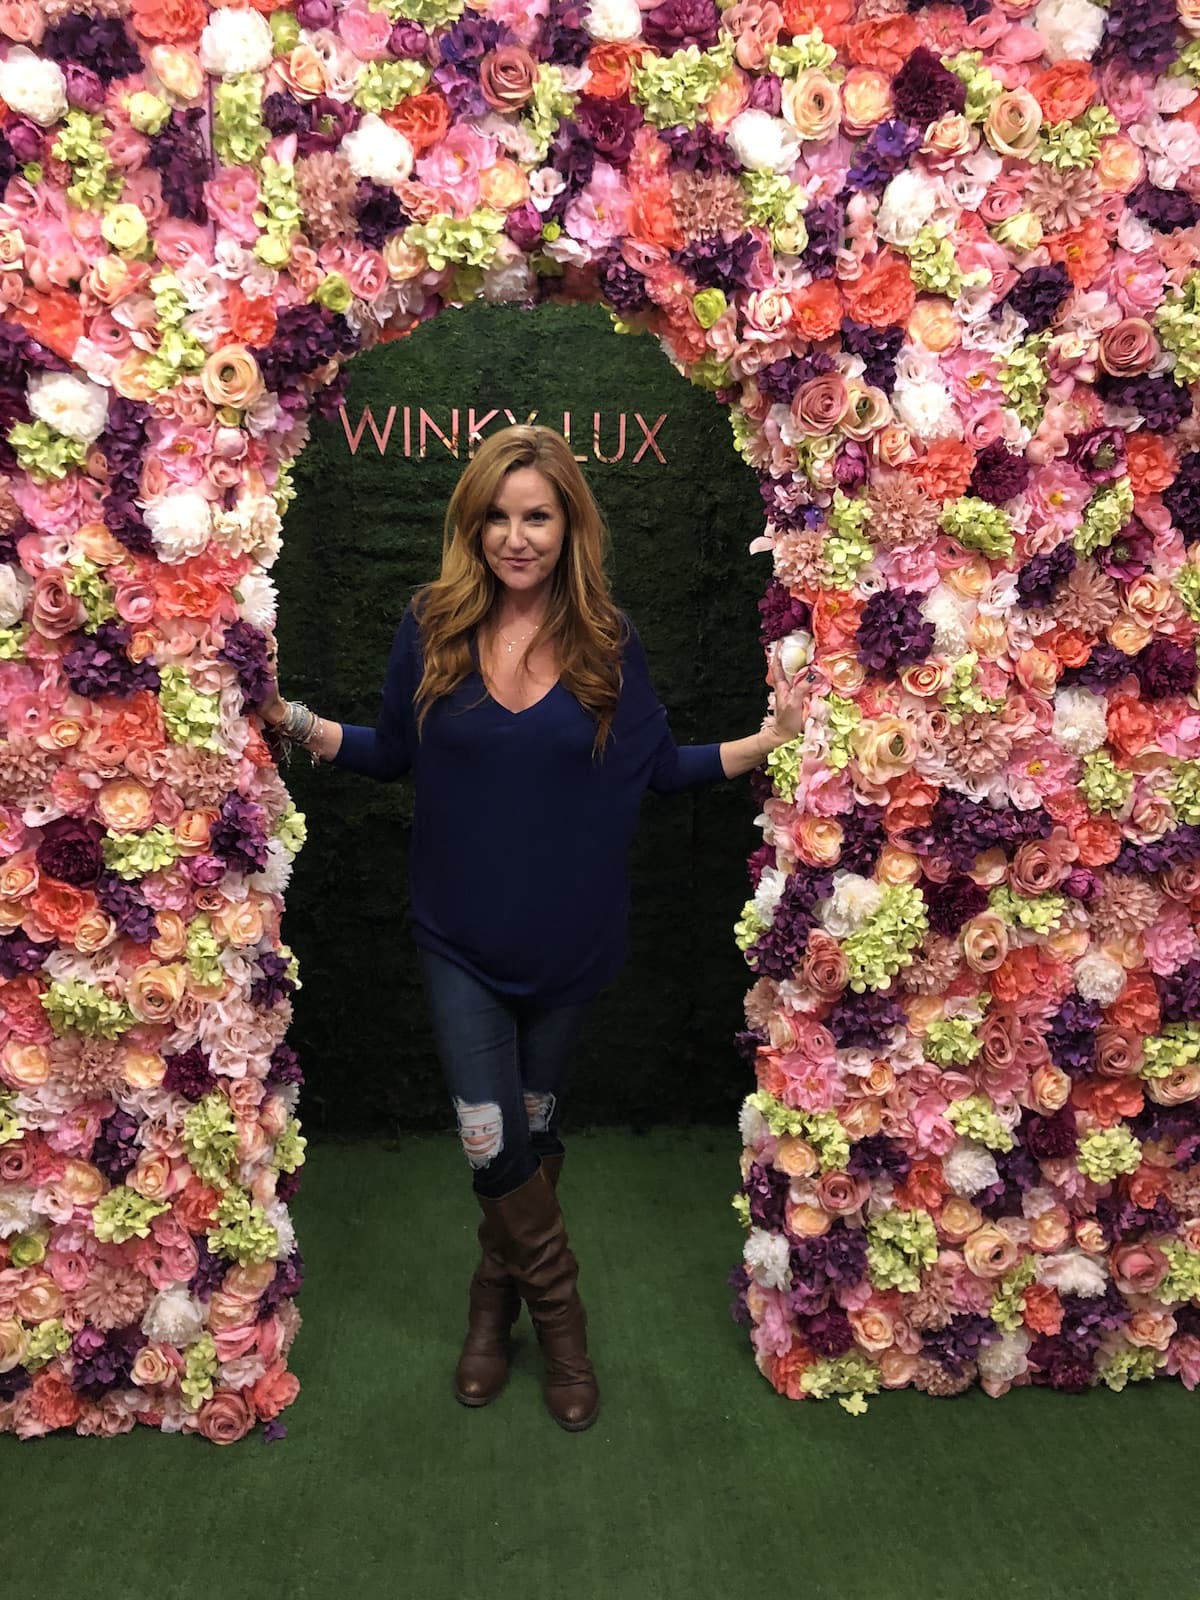 Enjoy Illinois: Exploring Chicago and the Magnificent Mile - Winky Lux